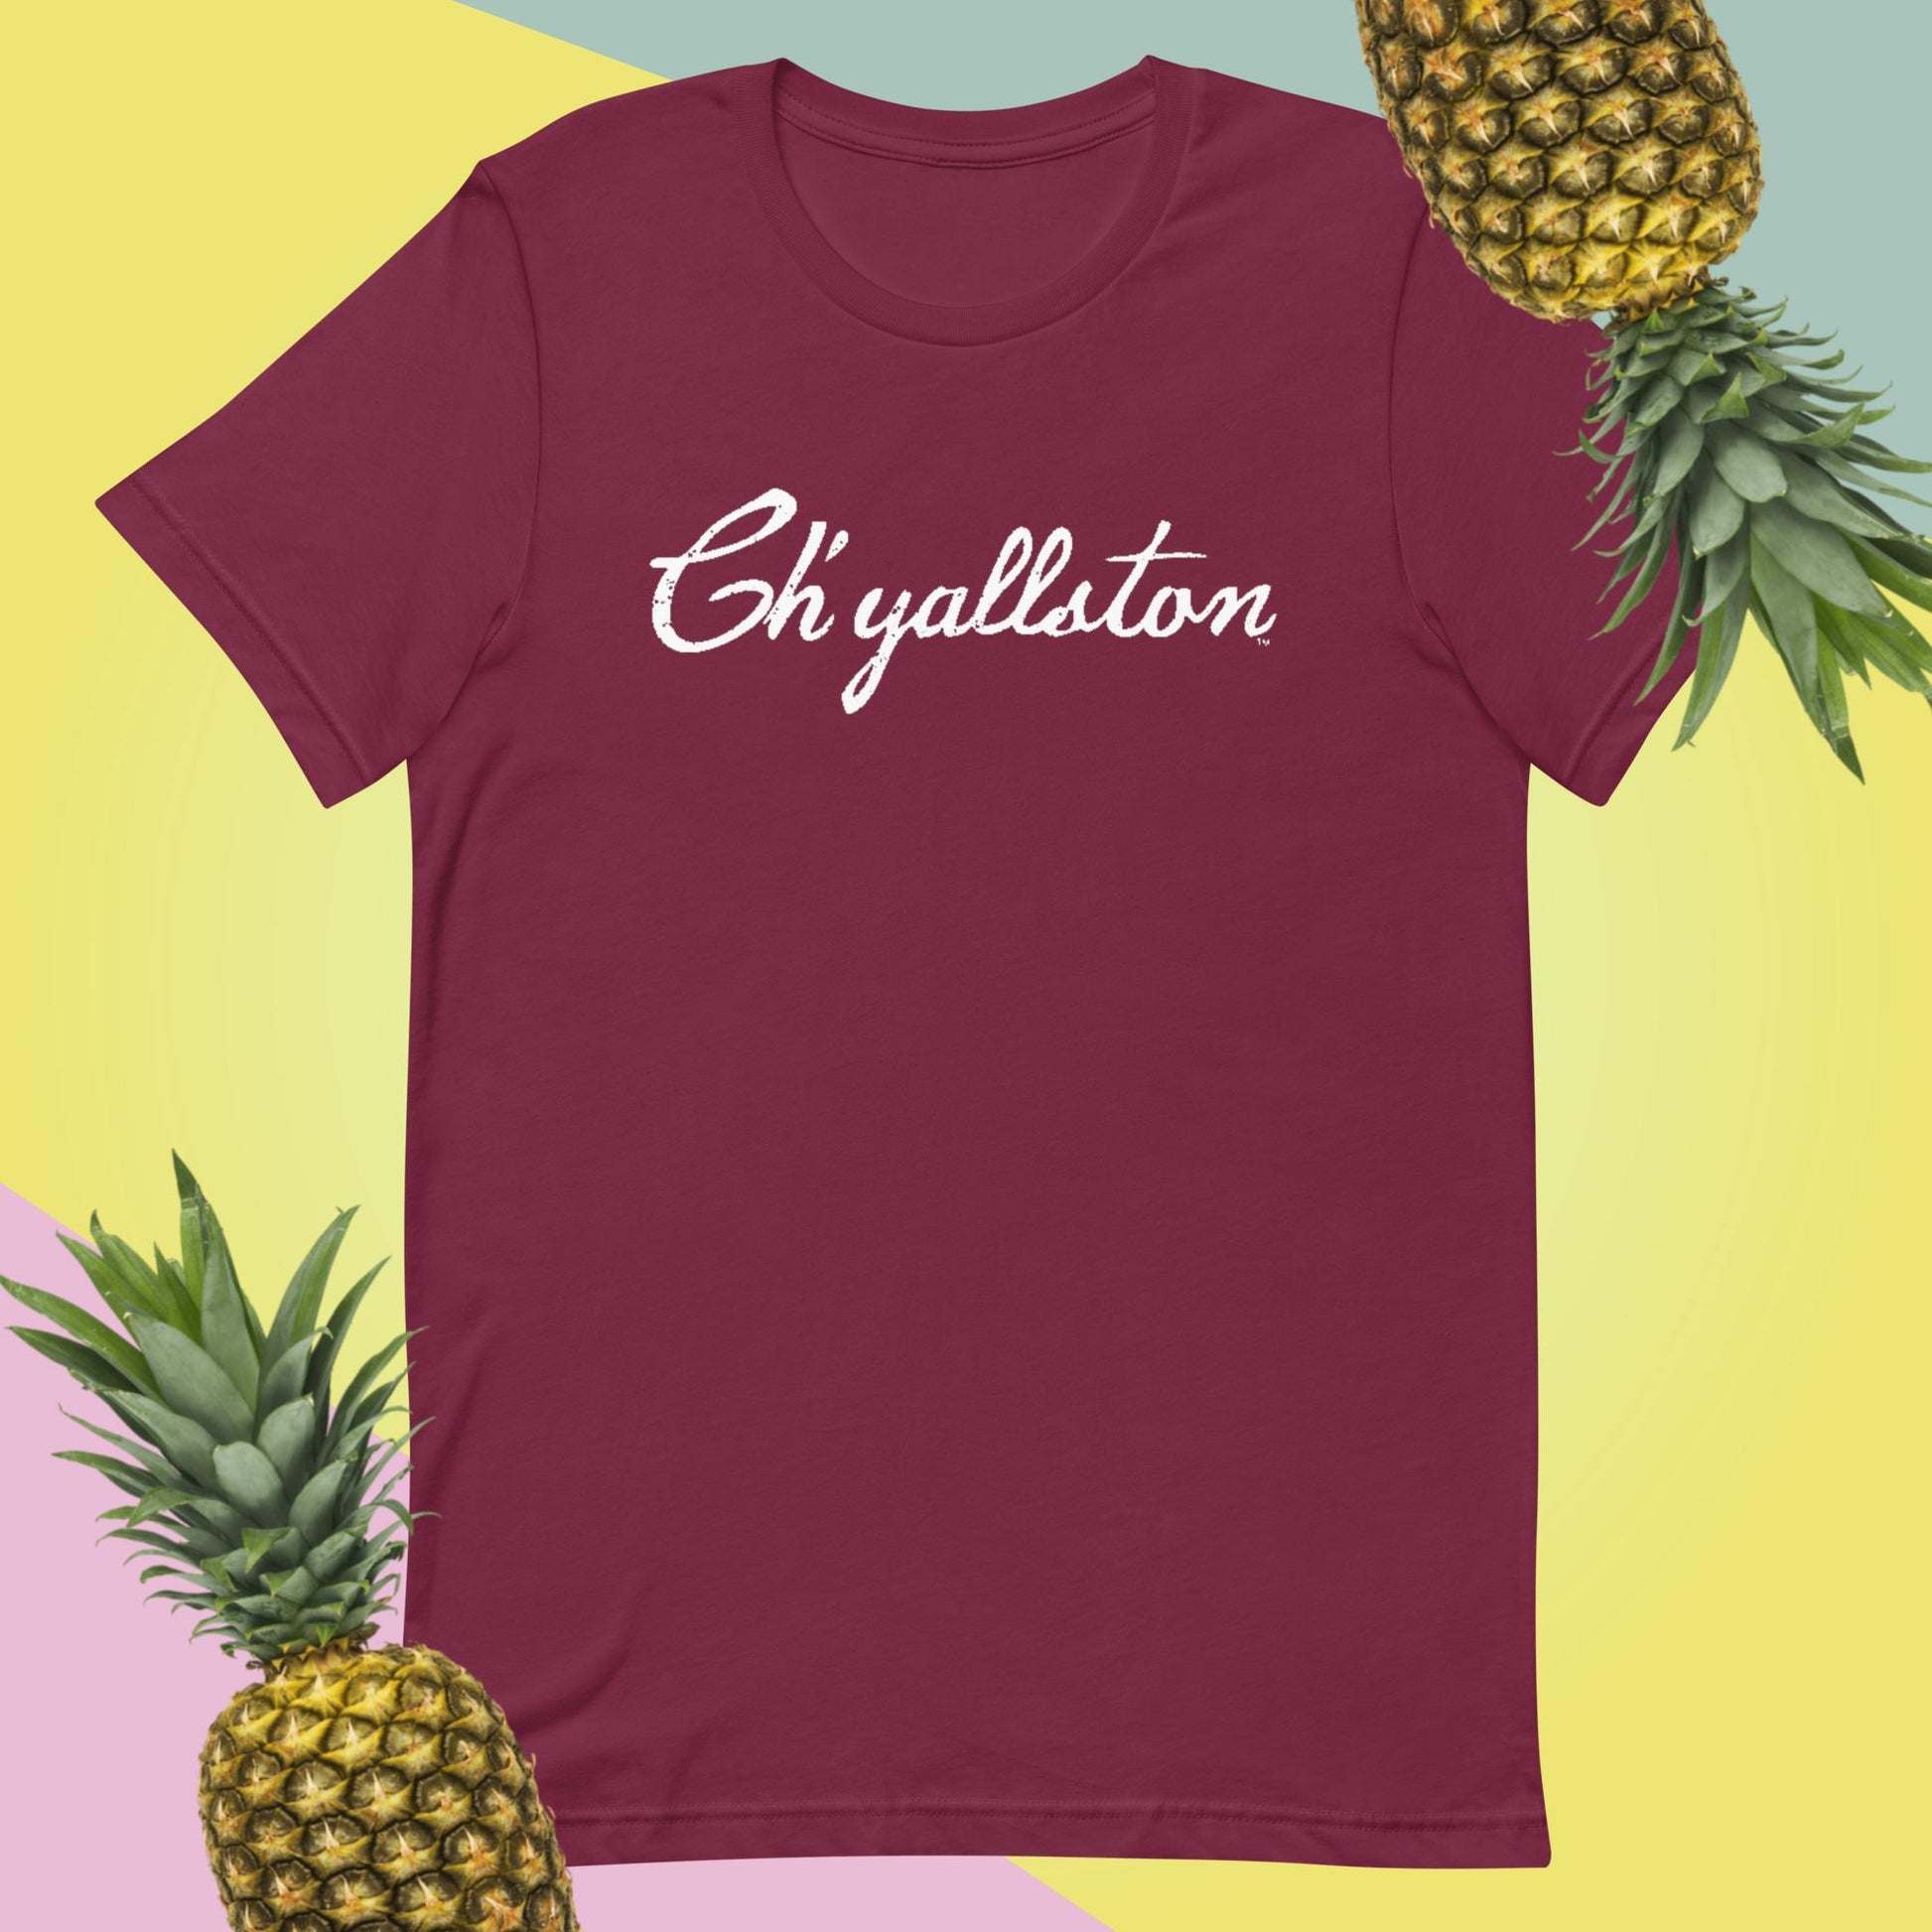 Ch'yallston Unisex T-shirt with White Lettering - Pluff Mud Mercantile